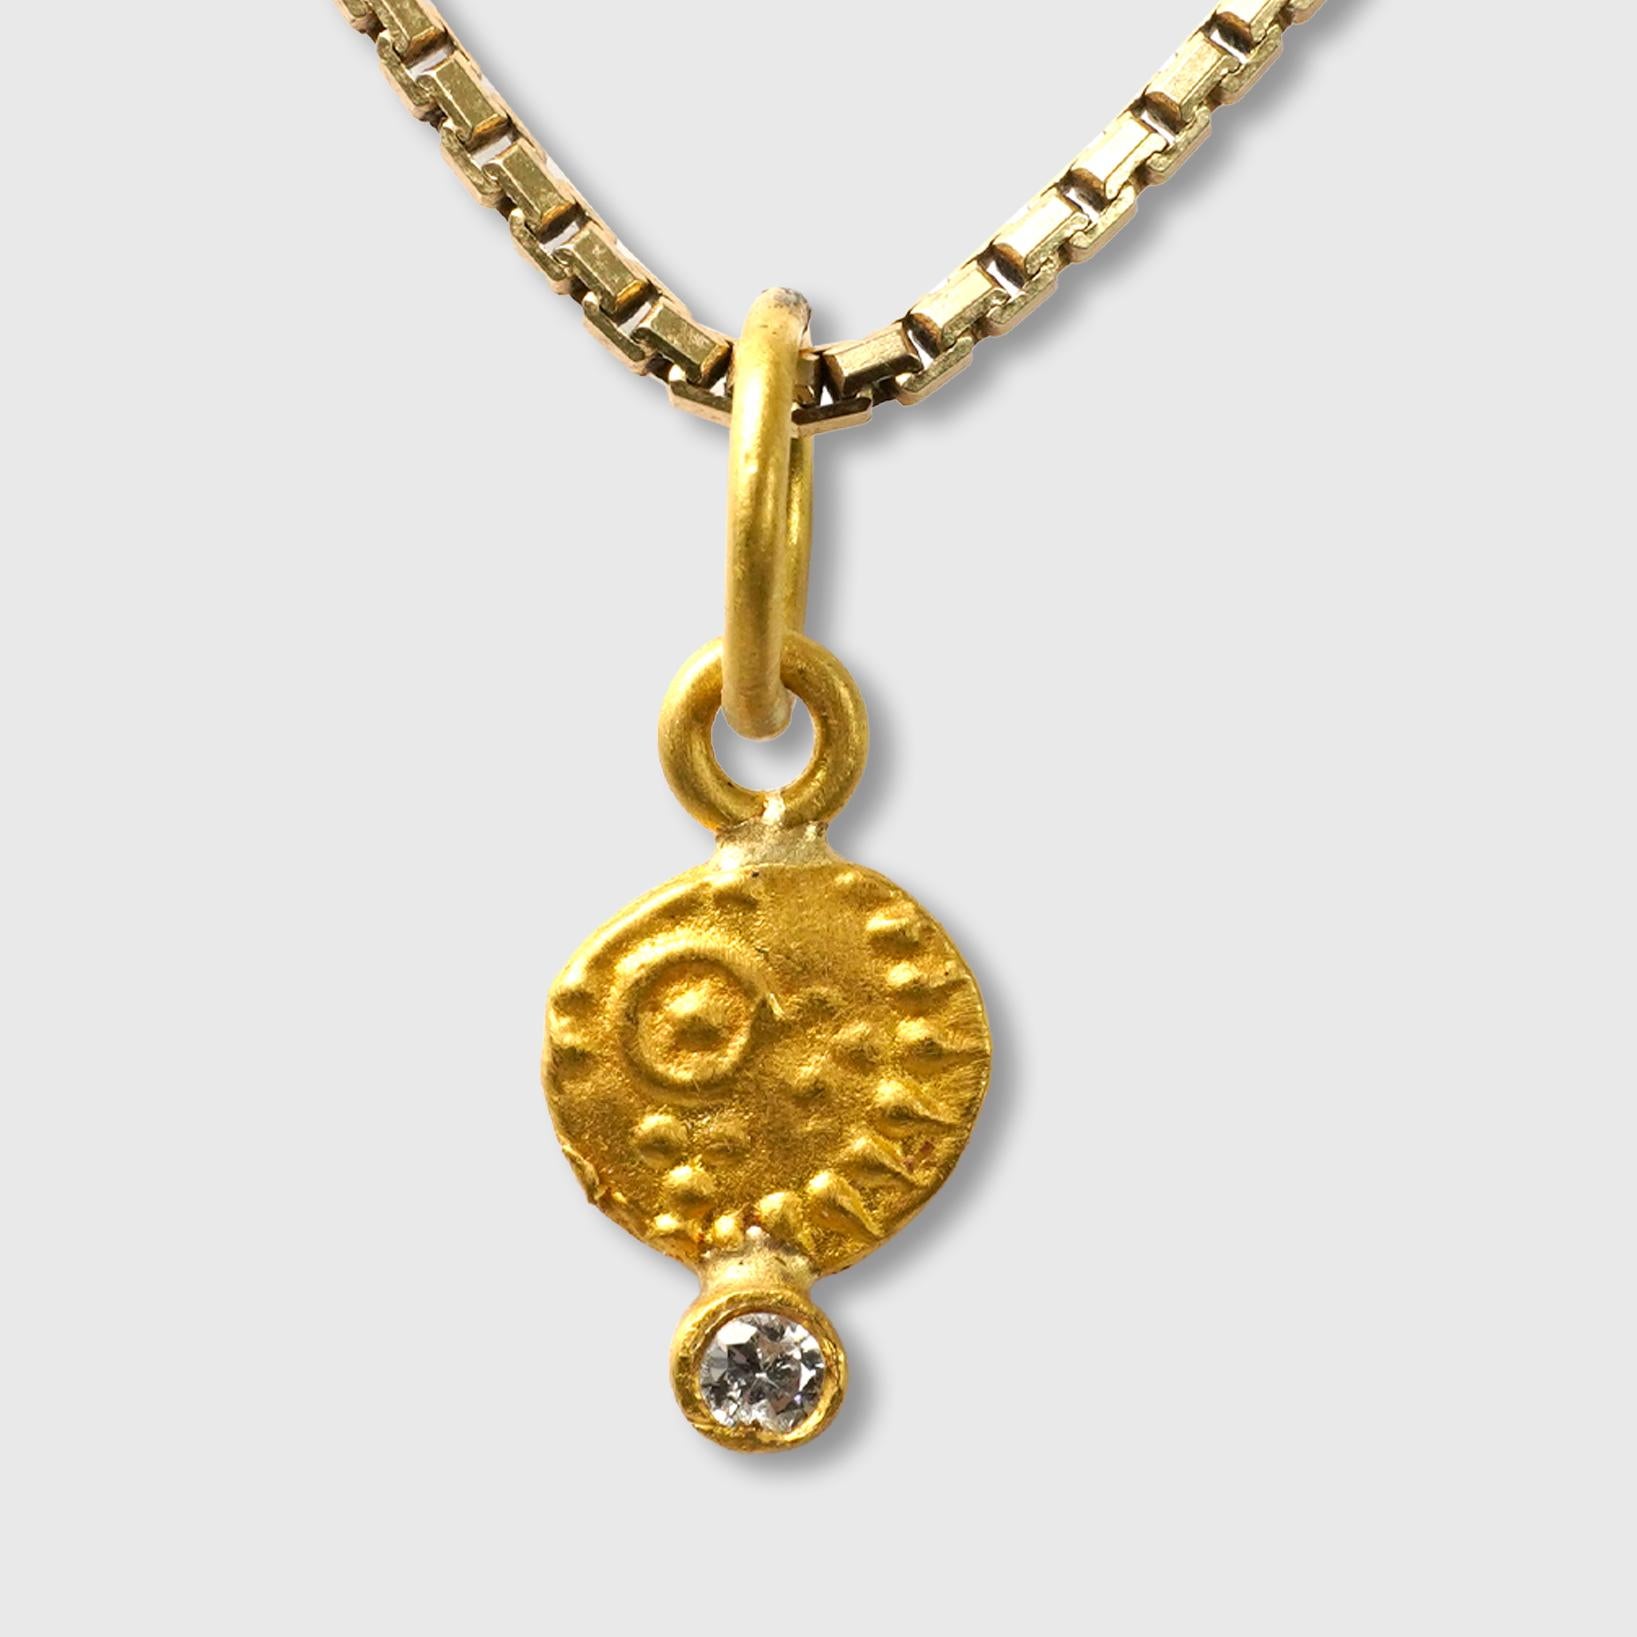 Primitive Coin Charm, Solid 24K Gold and 0.02ct Diamond

Size - Very Small Charm (Looks great paired and layered with other charm pendants)
1 Diamond - 0.02cts
24K Solid Gold - 0.97 grams

THE STORY

Wealth and prosperity: in many cultures, coin